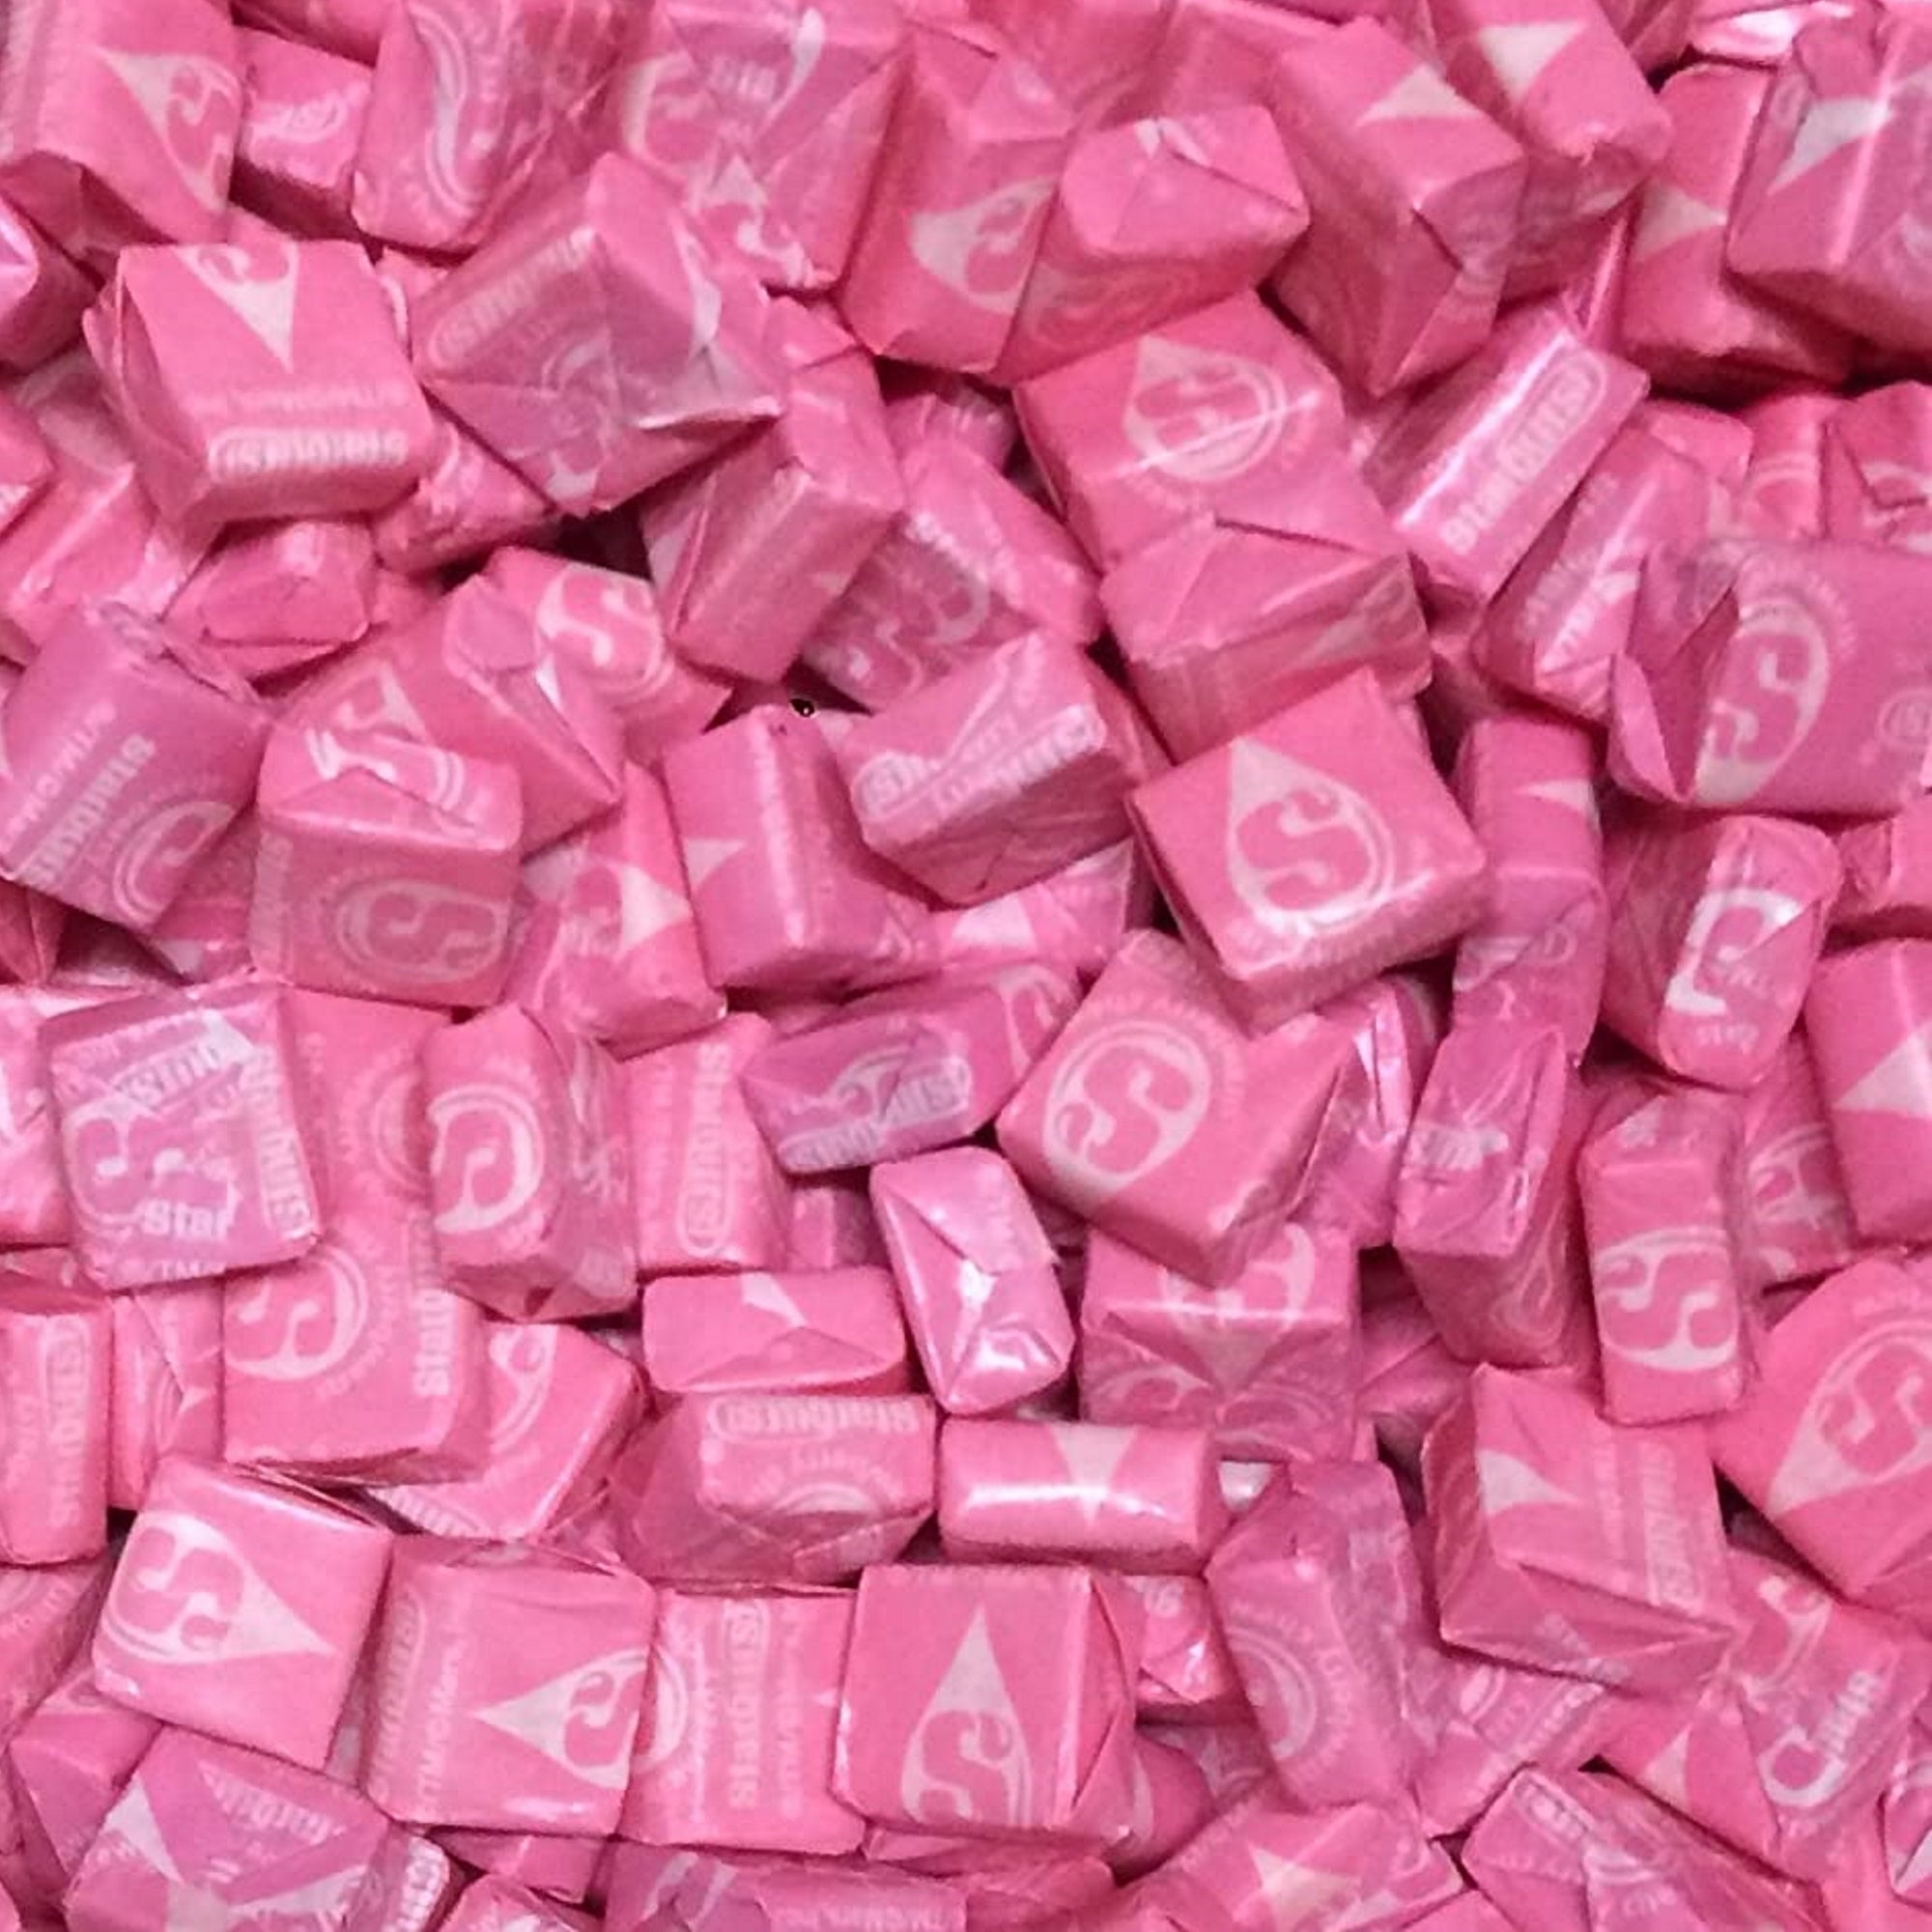 Starburst Pink Candy Bulk 2LB Bag of Pink Starburst Strawberry Candy. 2lbs  of All Pink Starburst, Pink Candy for Candy Buffet and Baby Shower by